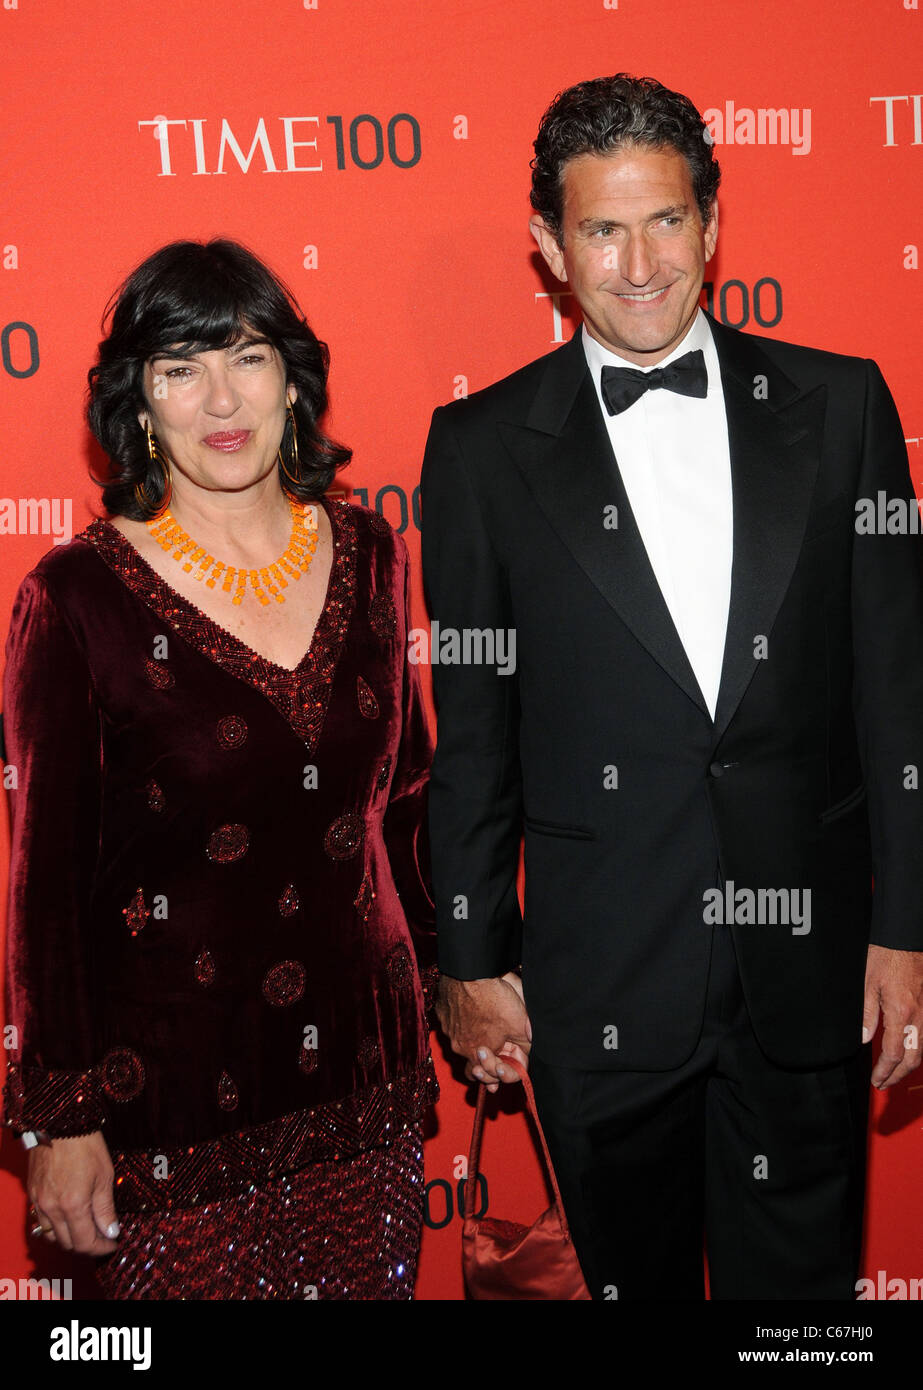 Christiane Amanpour, James Rubin at arrivals for TIME 100 GALA, Frederick P. Rose Hall - Jazz at Lincoln Center, New York, NY April 26, 2011. Photo By: Desiree Navarro/Everett Collection Stock Photo